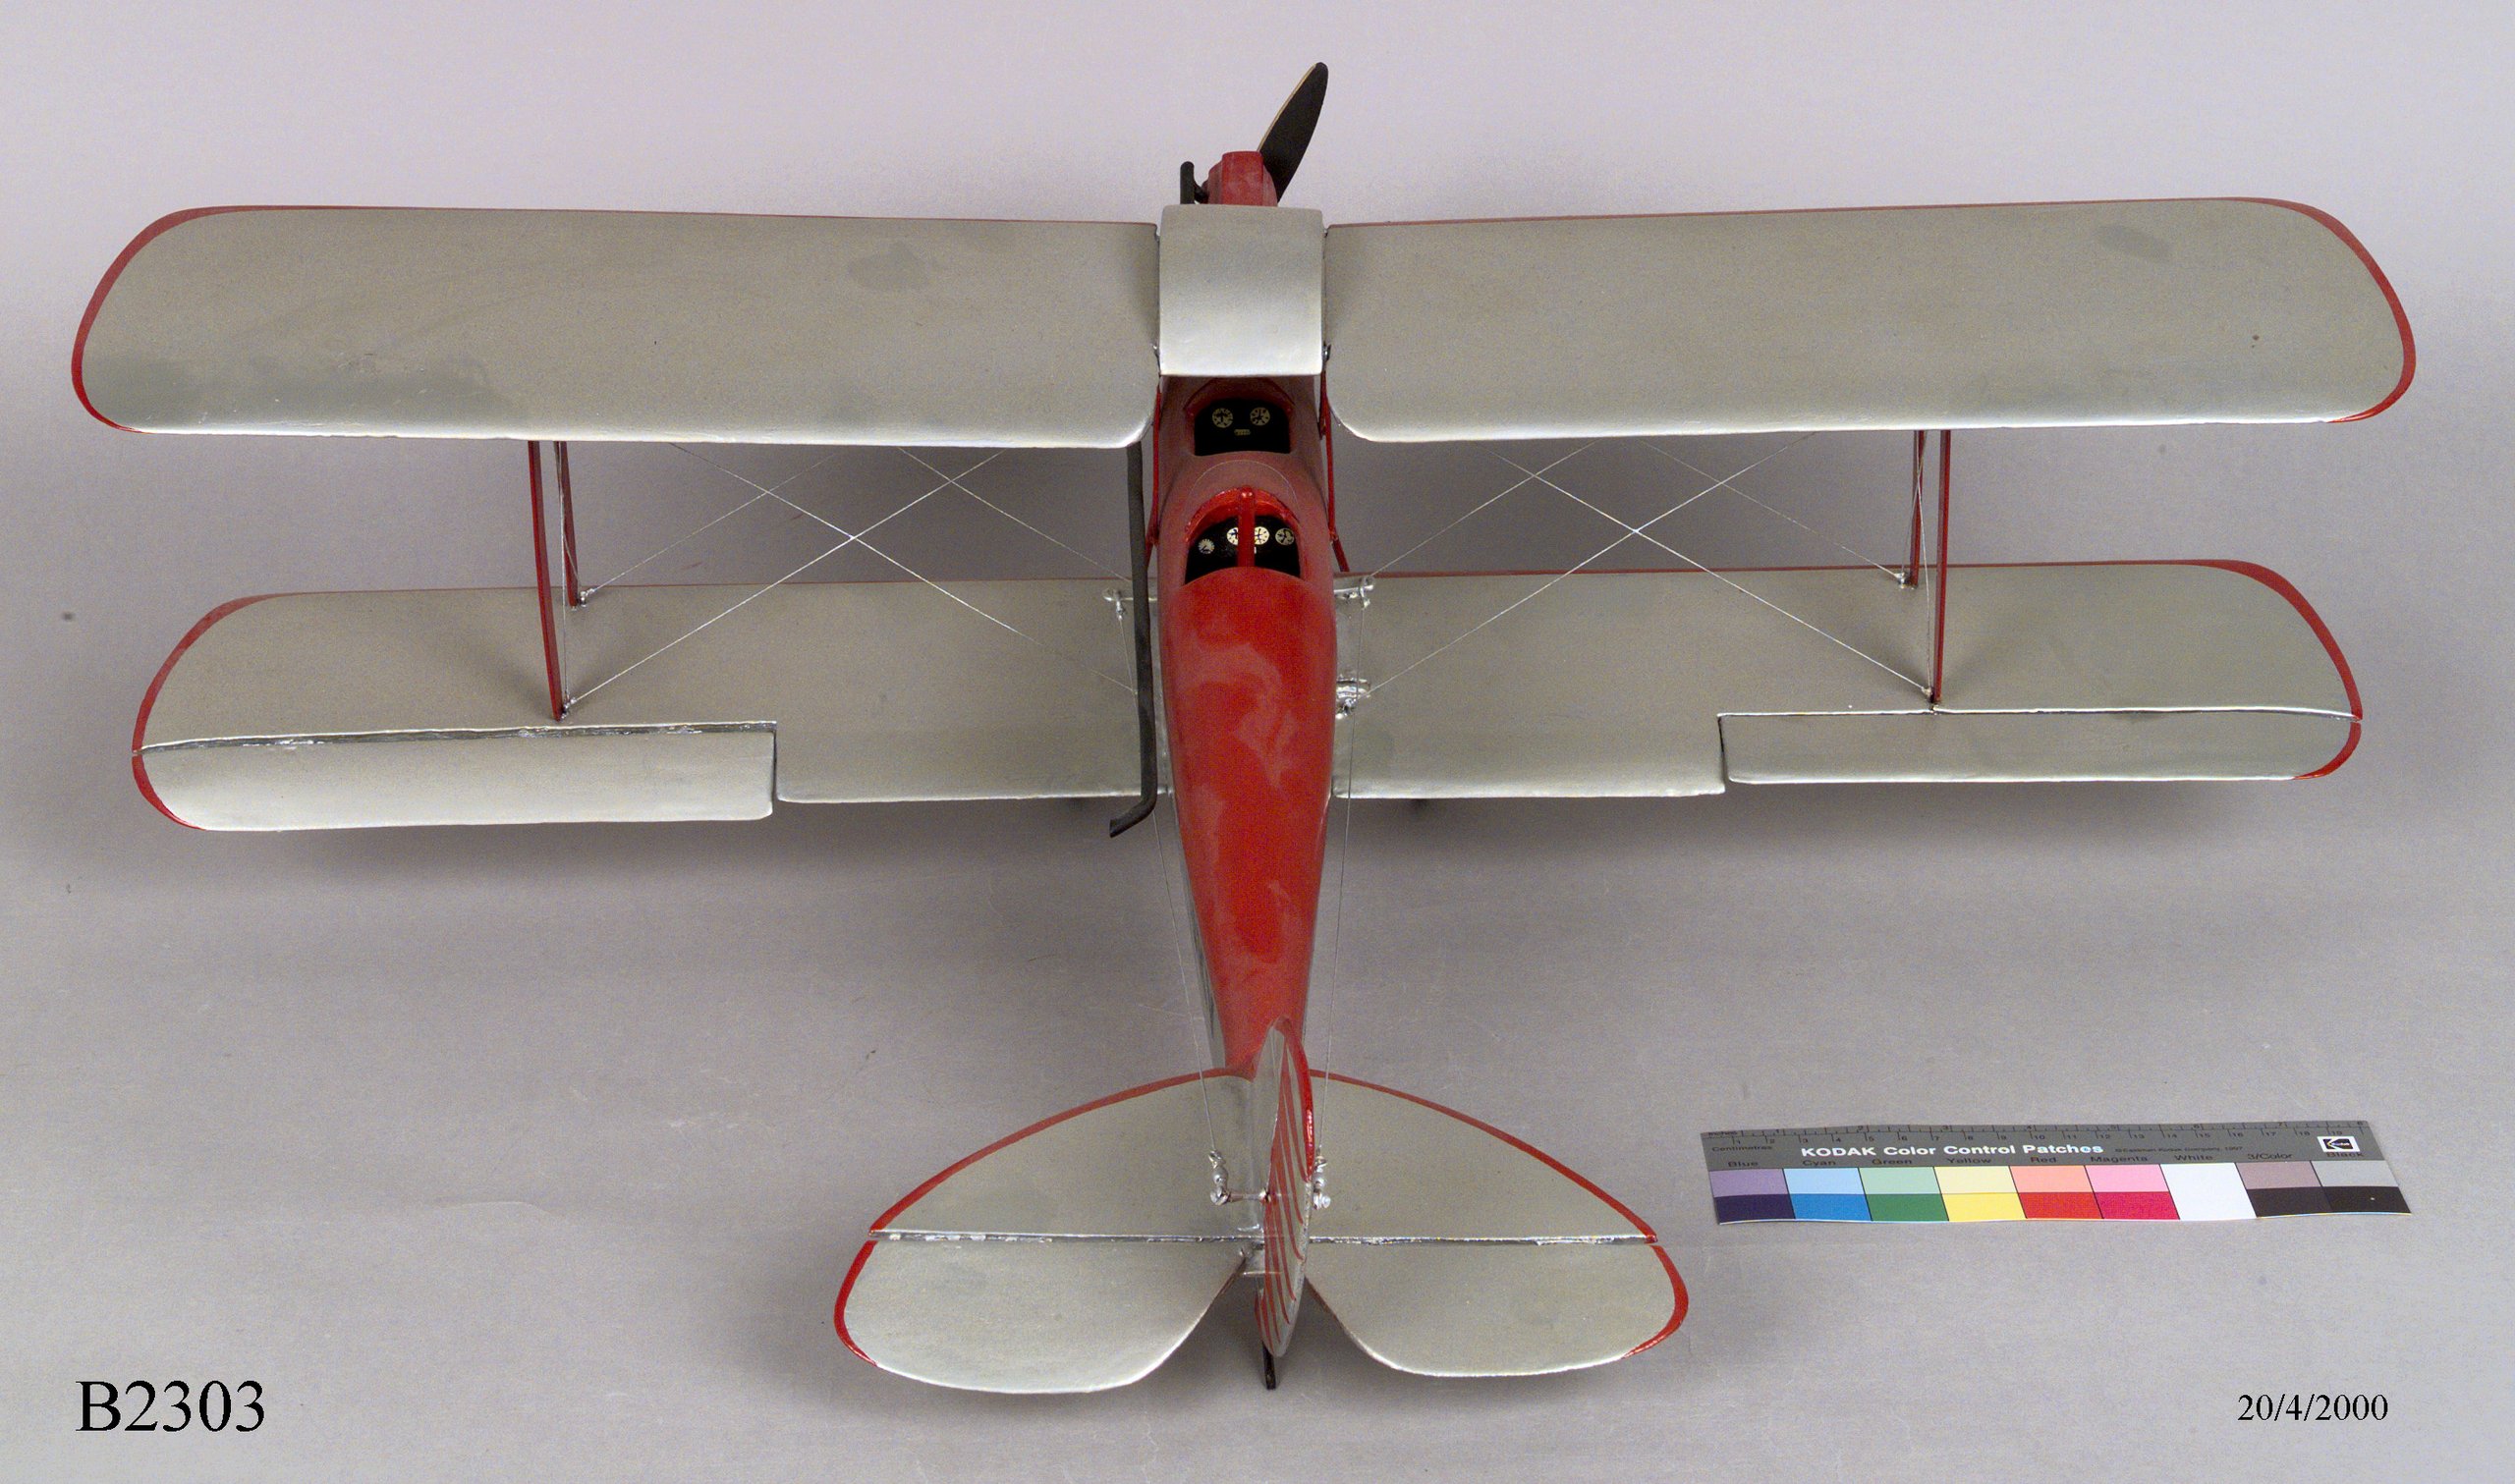 Model of Nancy Lyle's Gipsy Moth aircraft "Diana" VH-UKV made by Arch Dunne